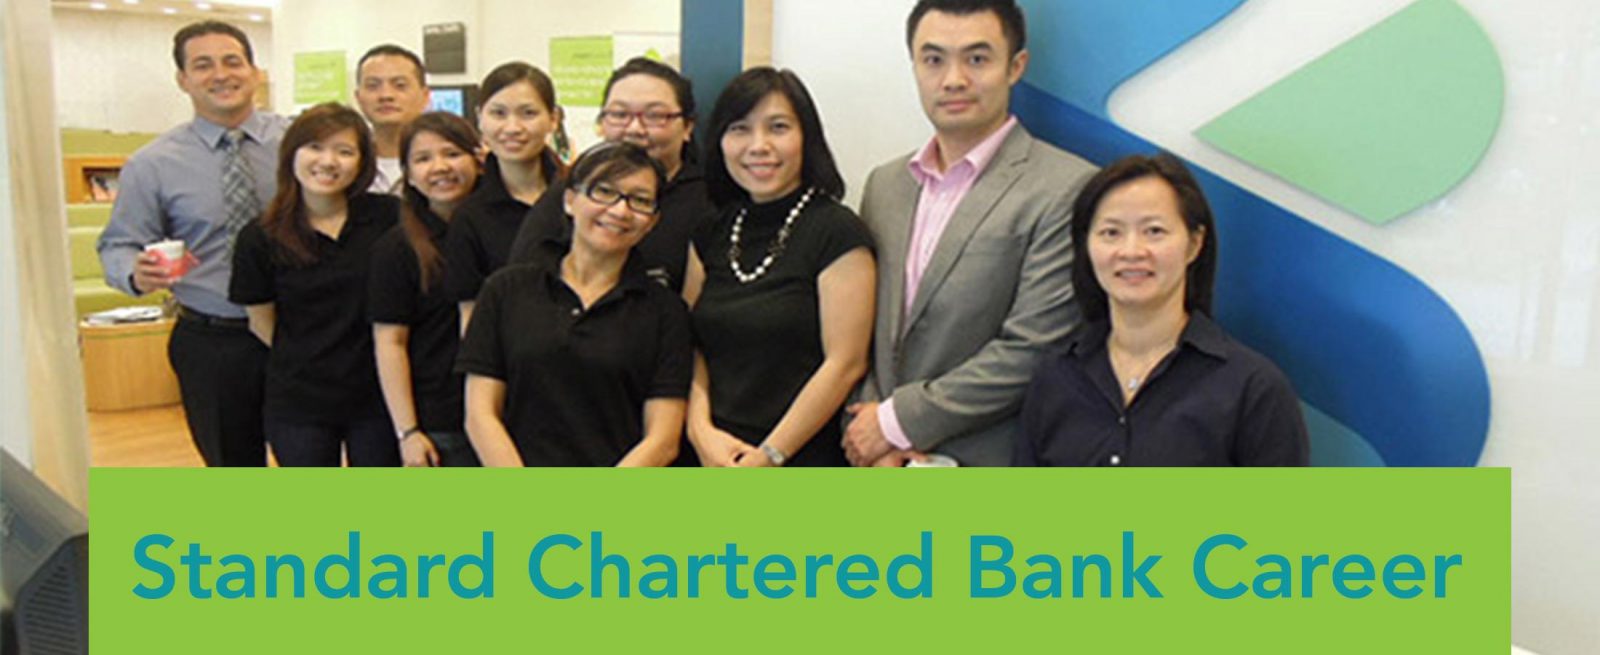 How to pass Standard Chartered Bank Online Assessments